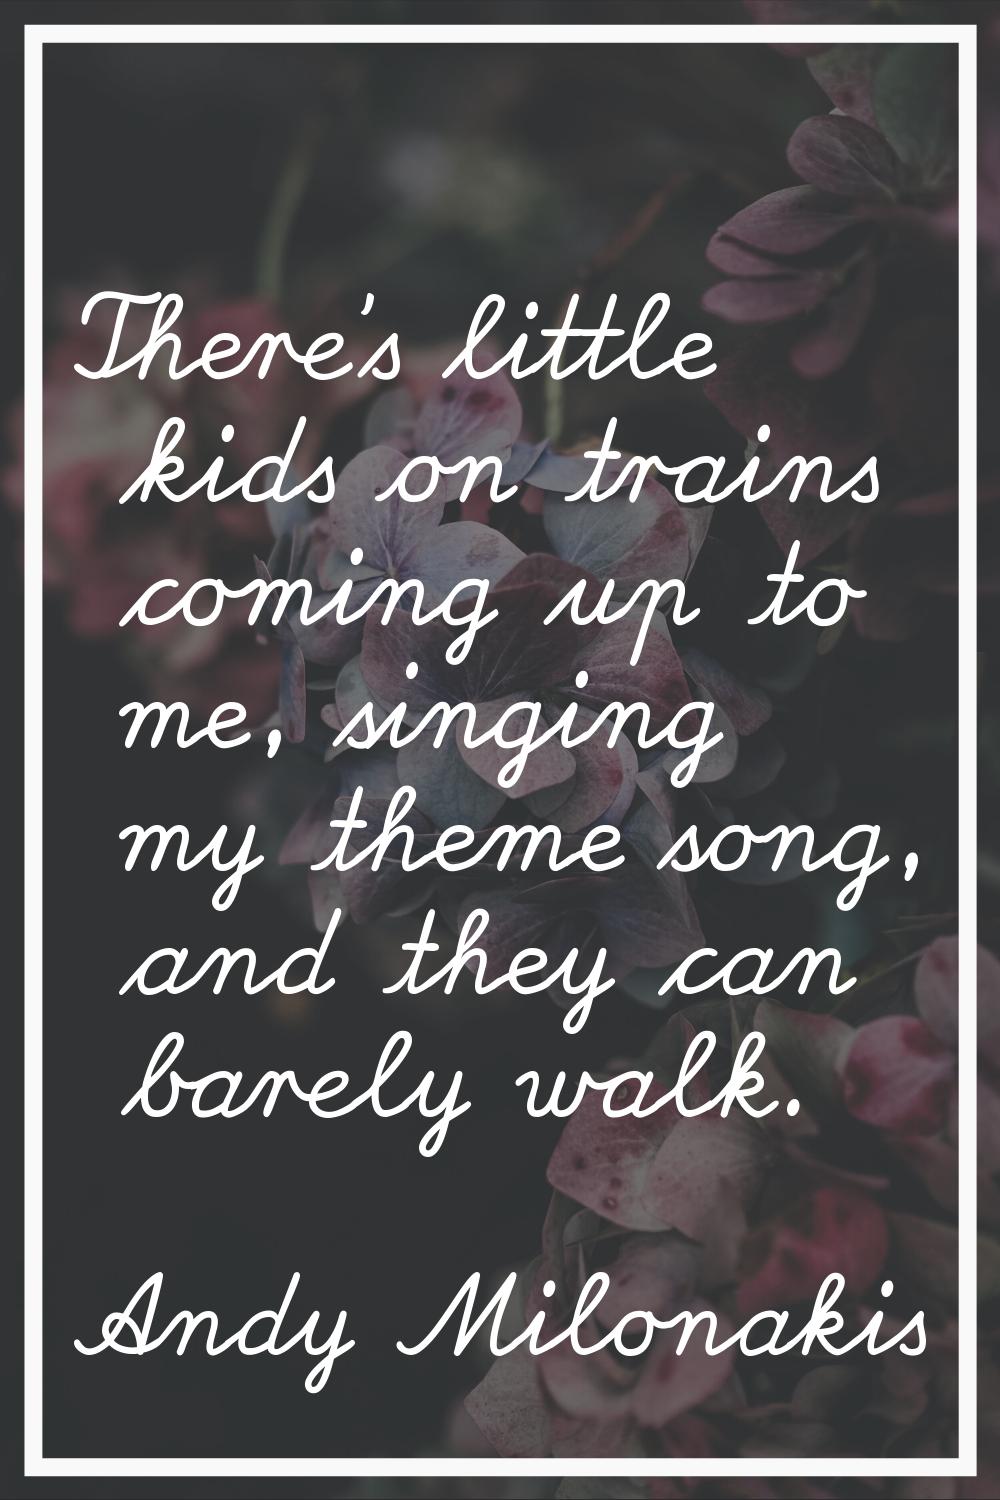 There's little kids on trains coming up to me, singing my theme song, and they can barely walk.